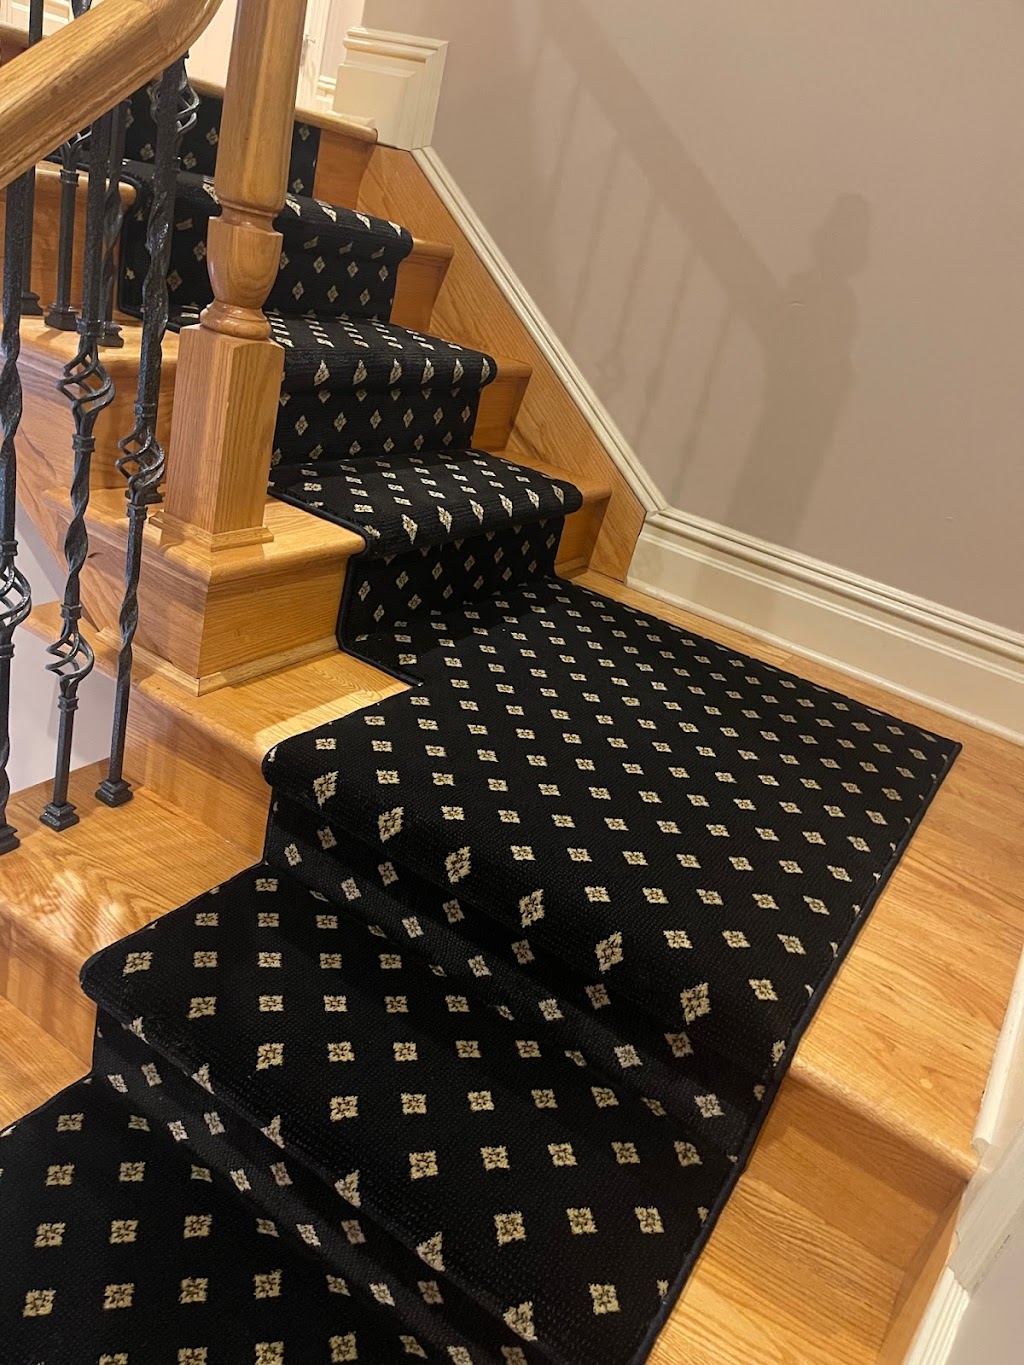 Arias Carpet One Floor & Home | 315 Industrial Dr, Nazareth, PA 18064 | Phone: (484) 293-8151